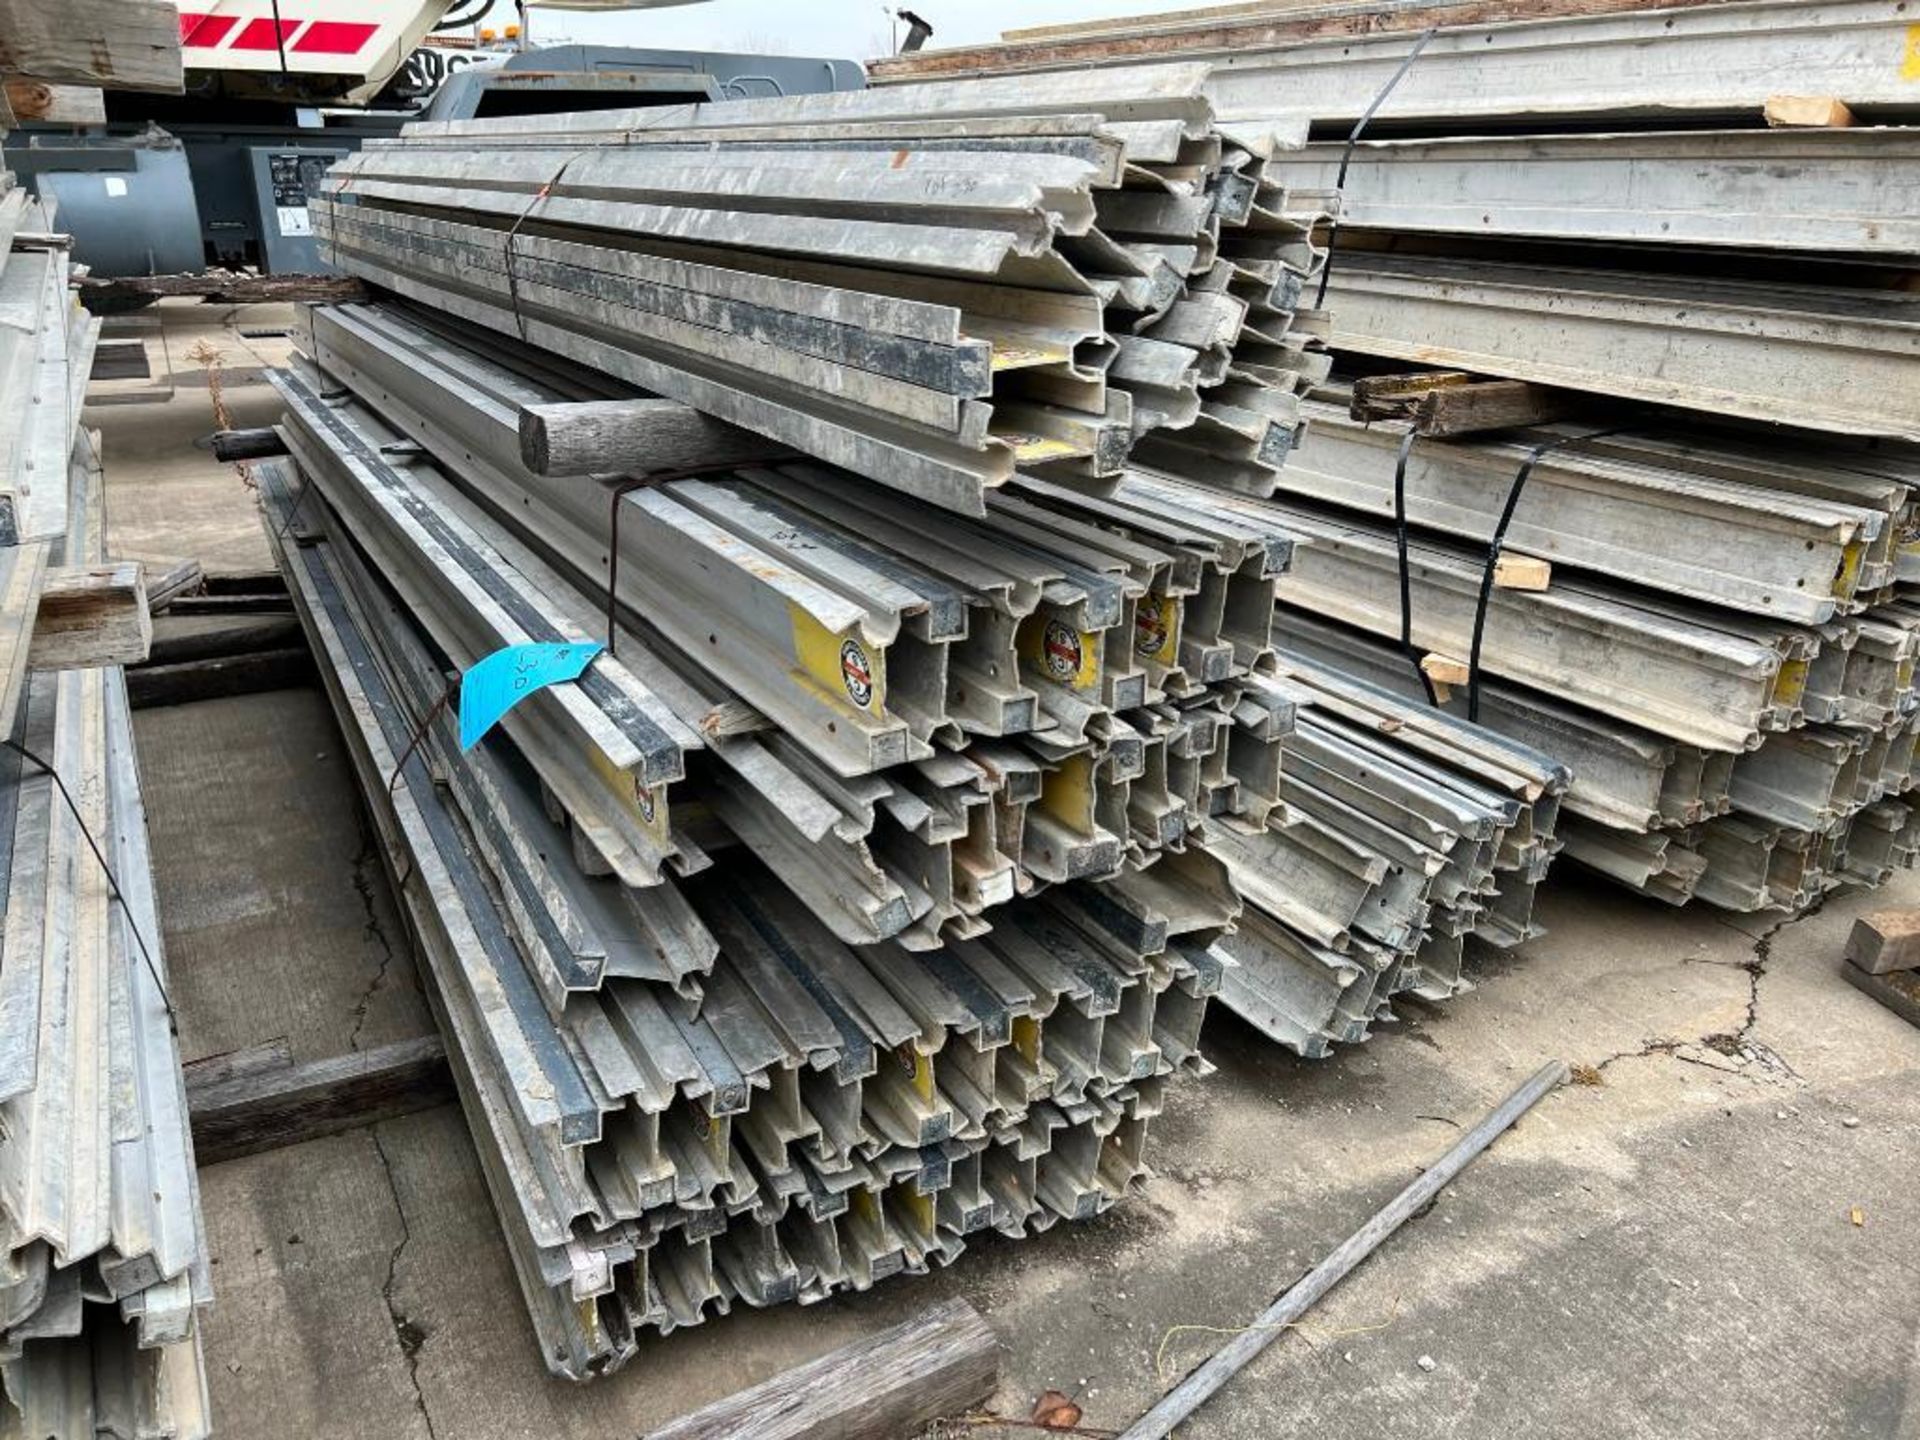 LOT: Approx. (65) 6 1/2" Symons Joists, Assorted